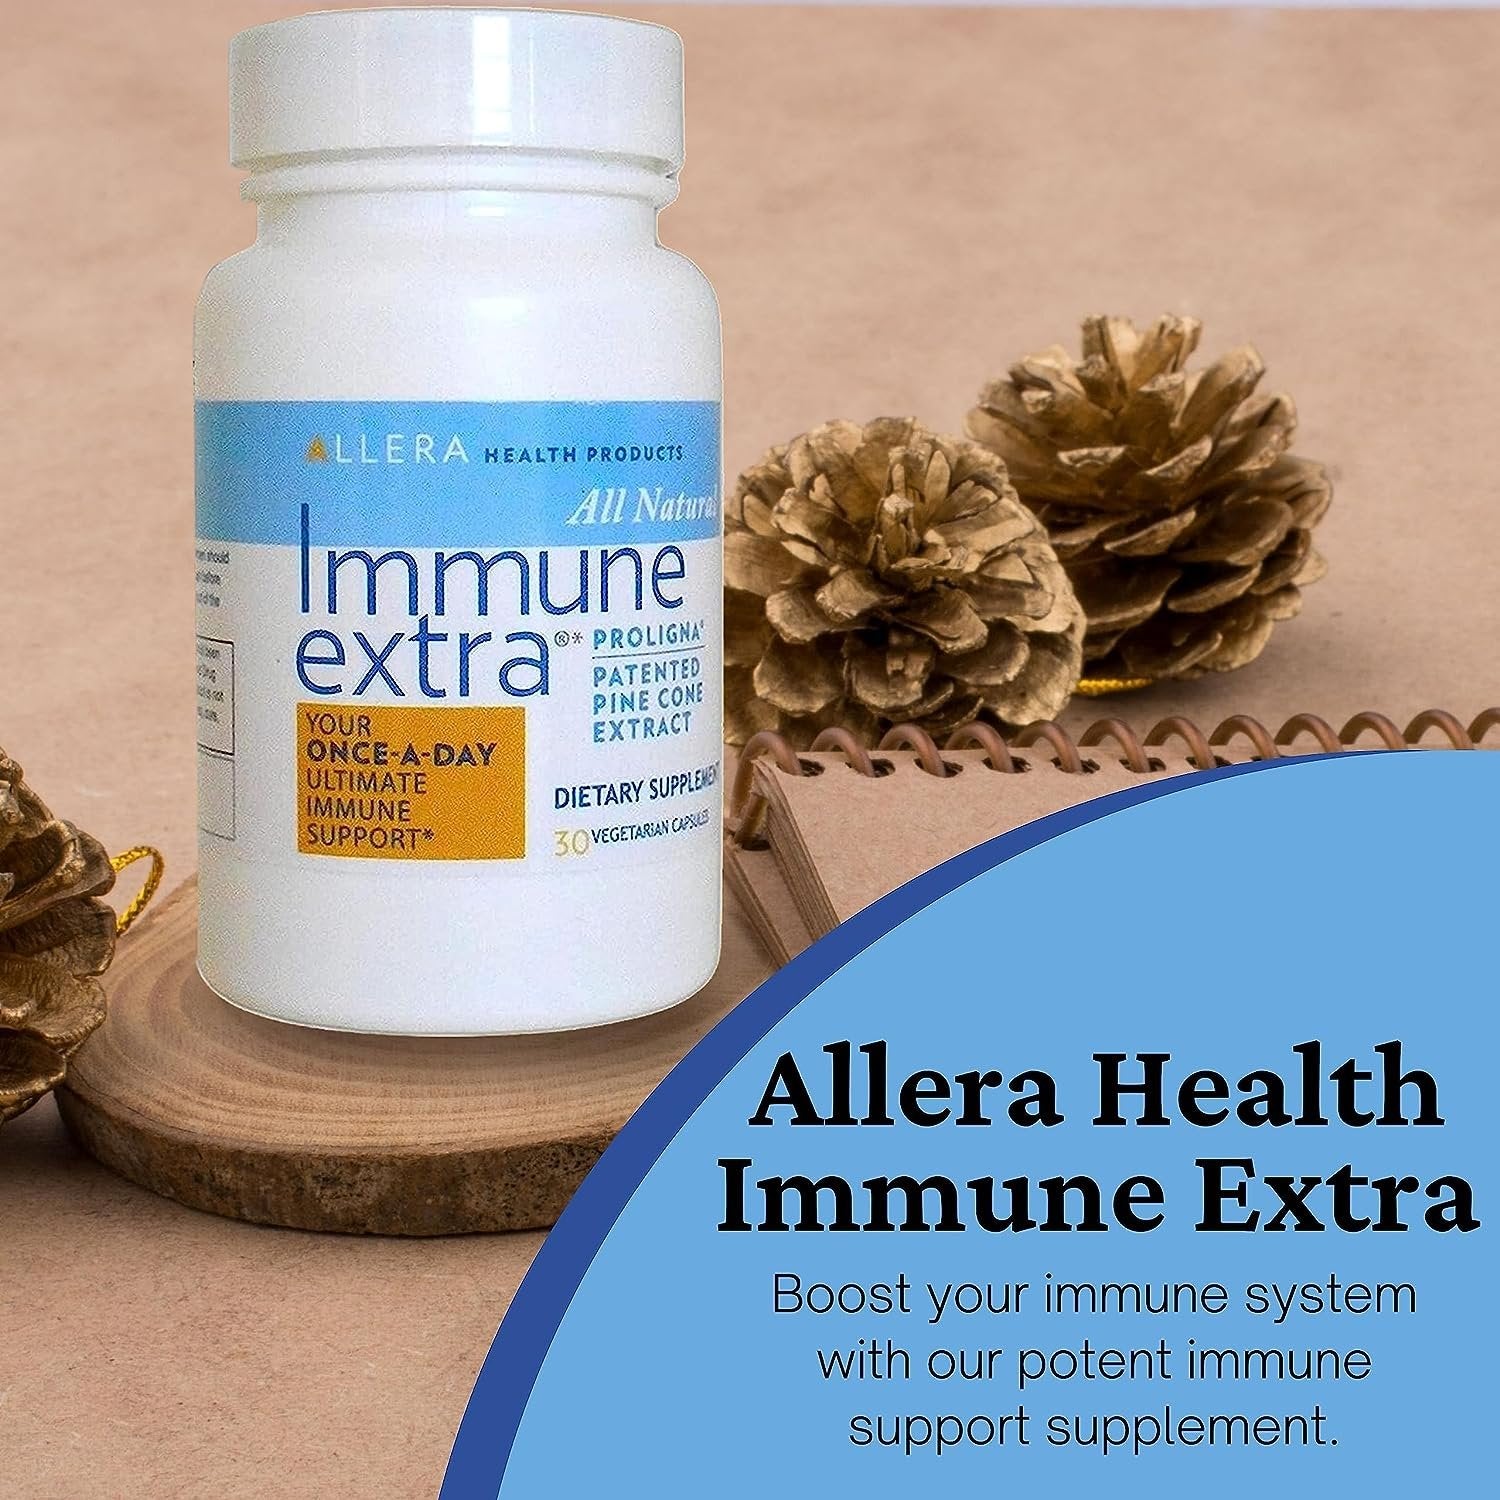 Immune health products